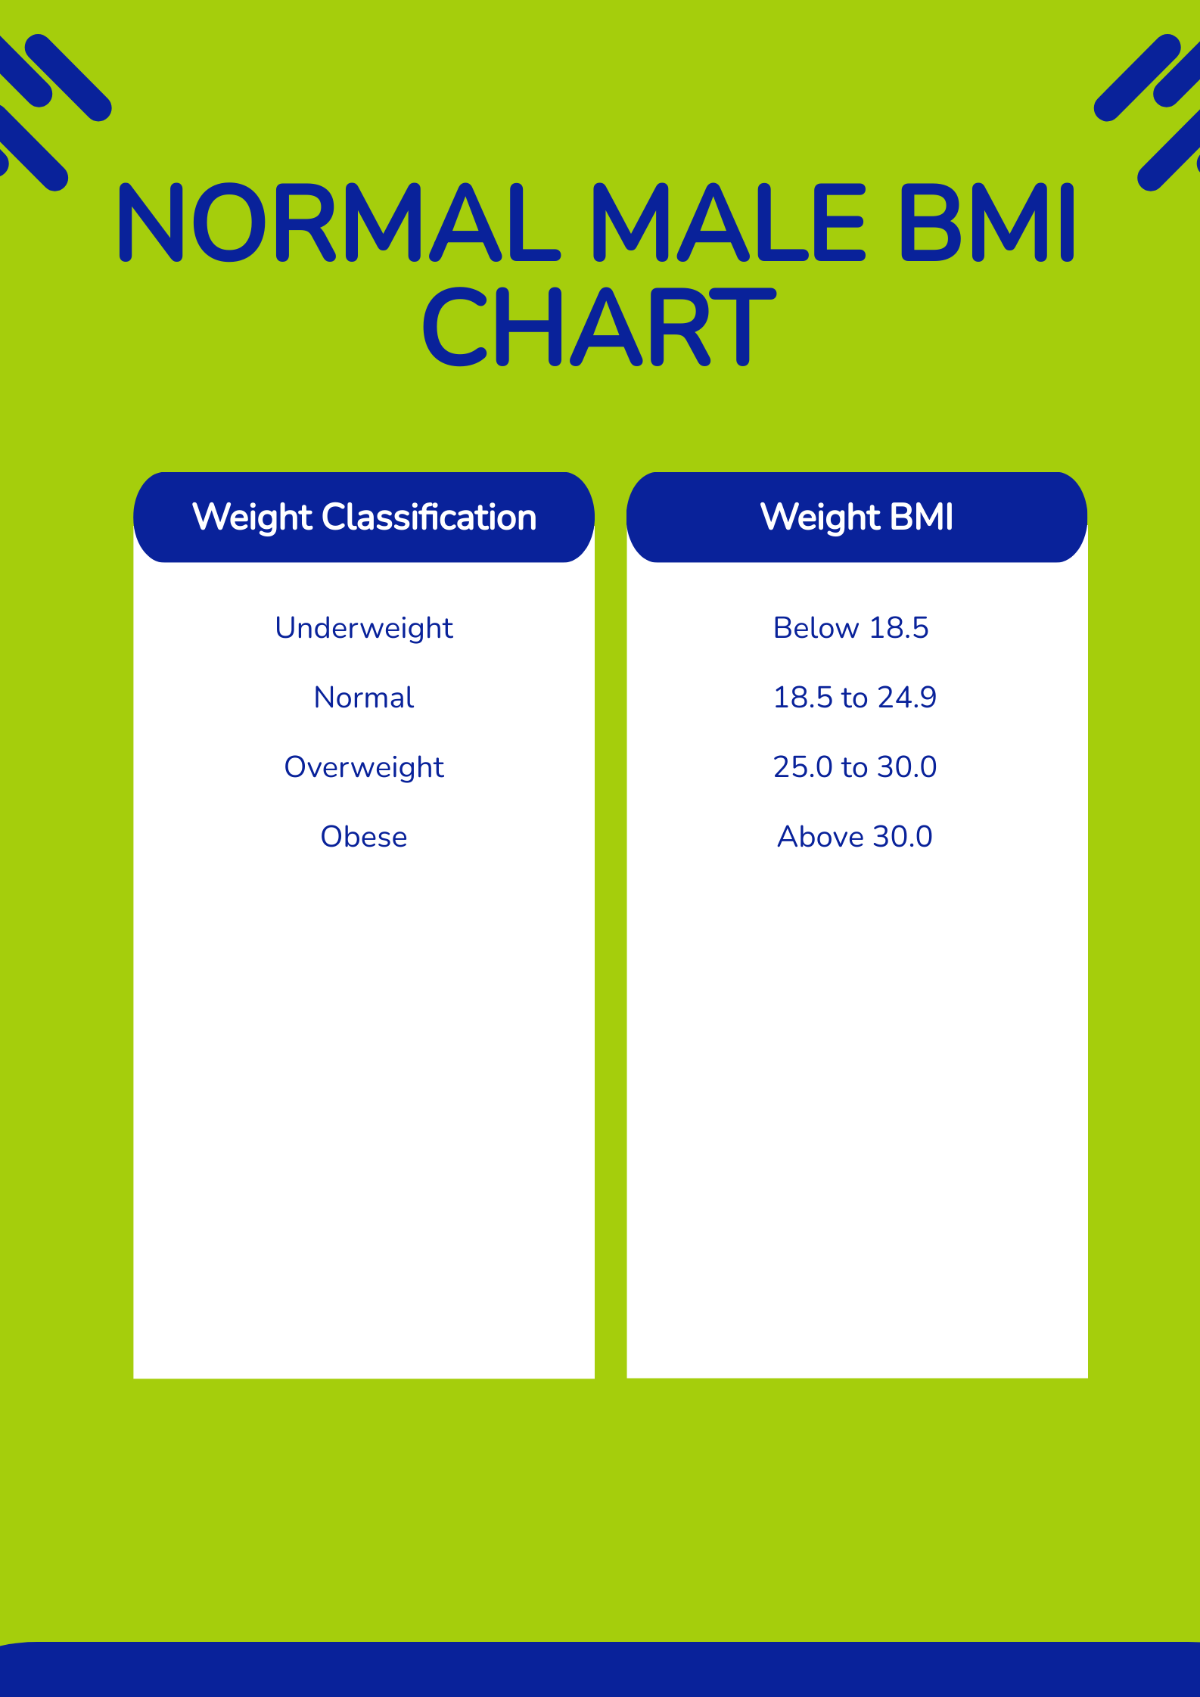 Normal Male BMI Chart